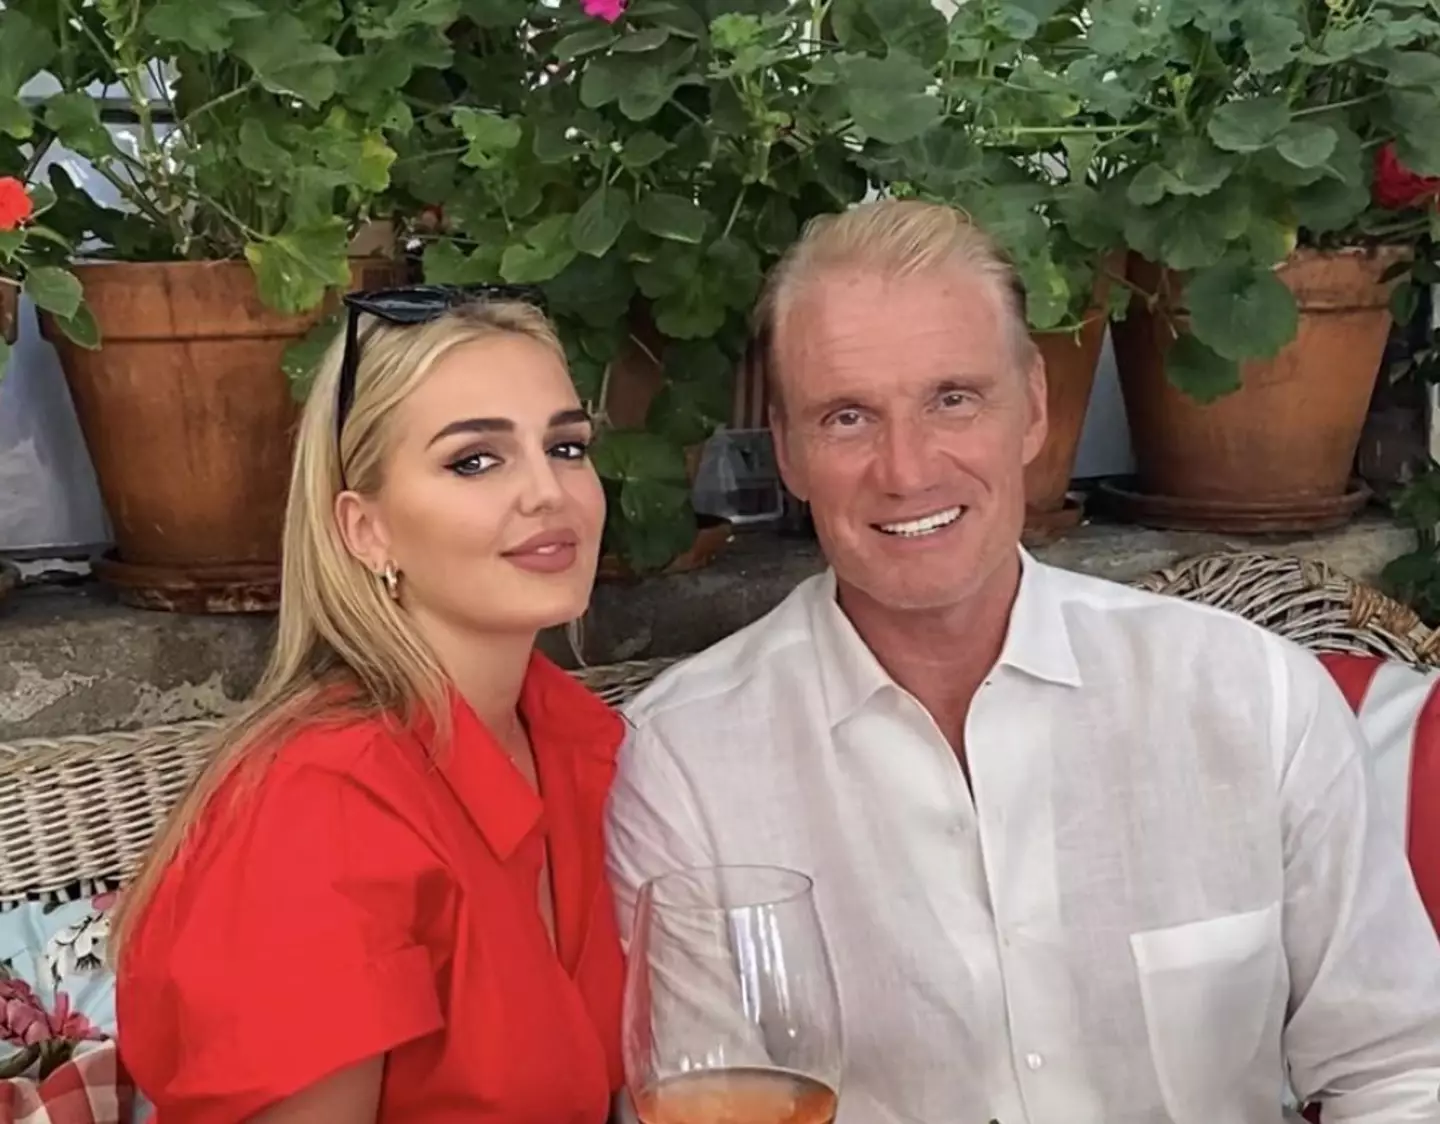 Emma Krokdal and Dolph Lundgren first met in Hollywood.